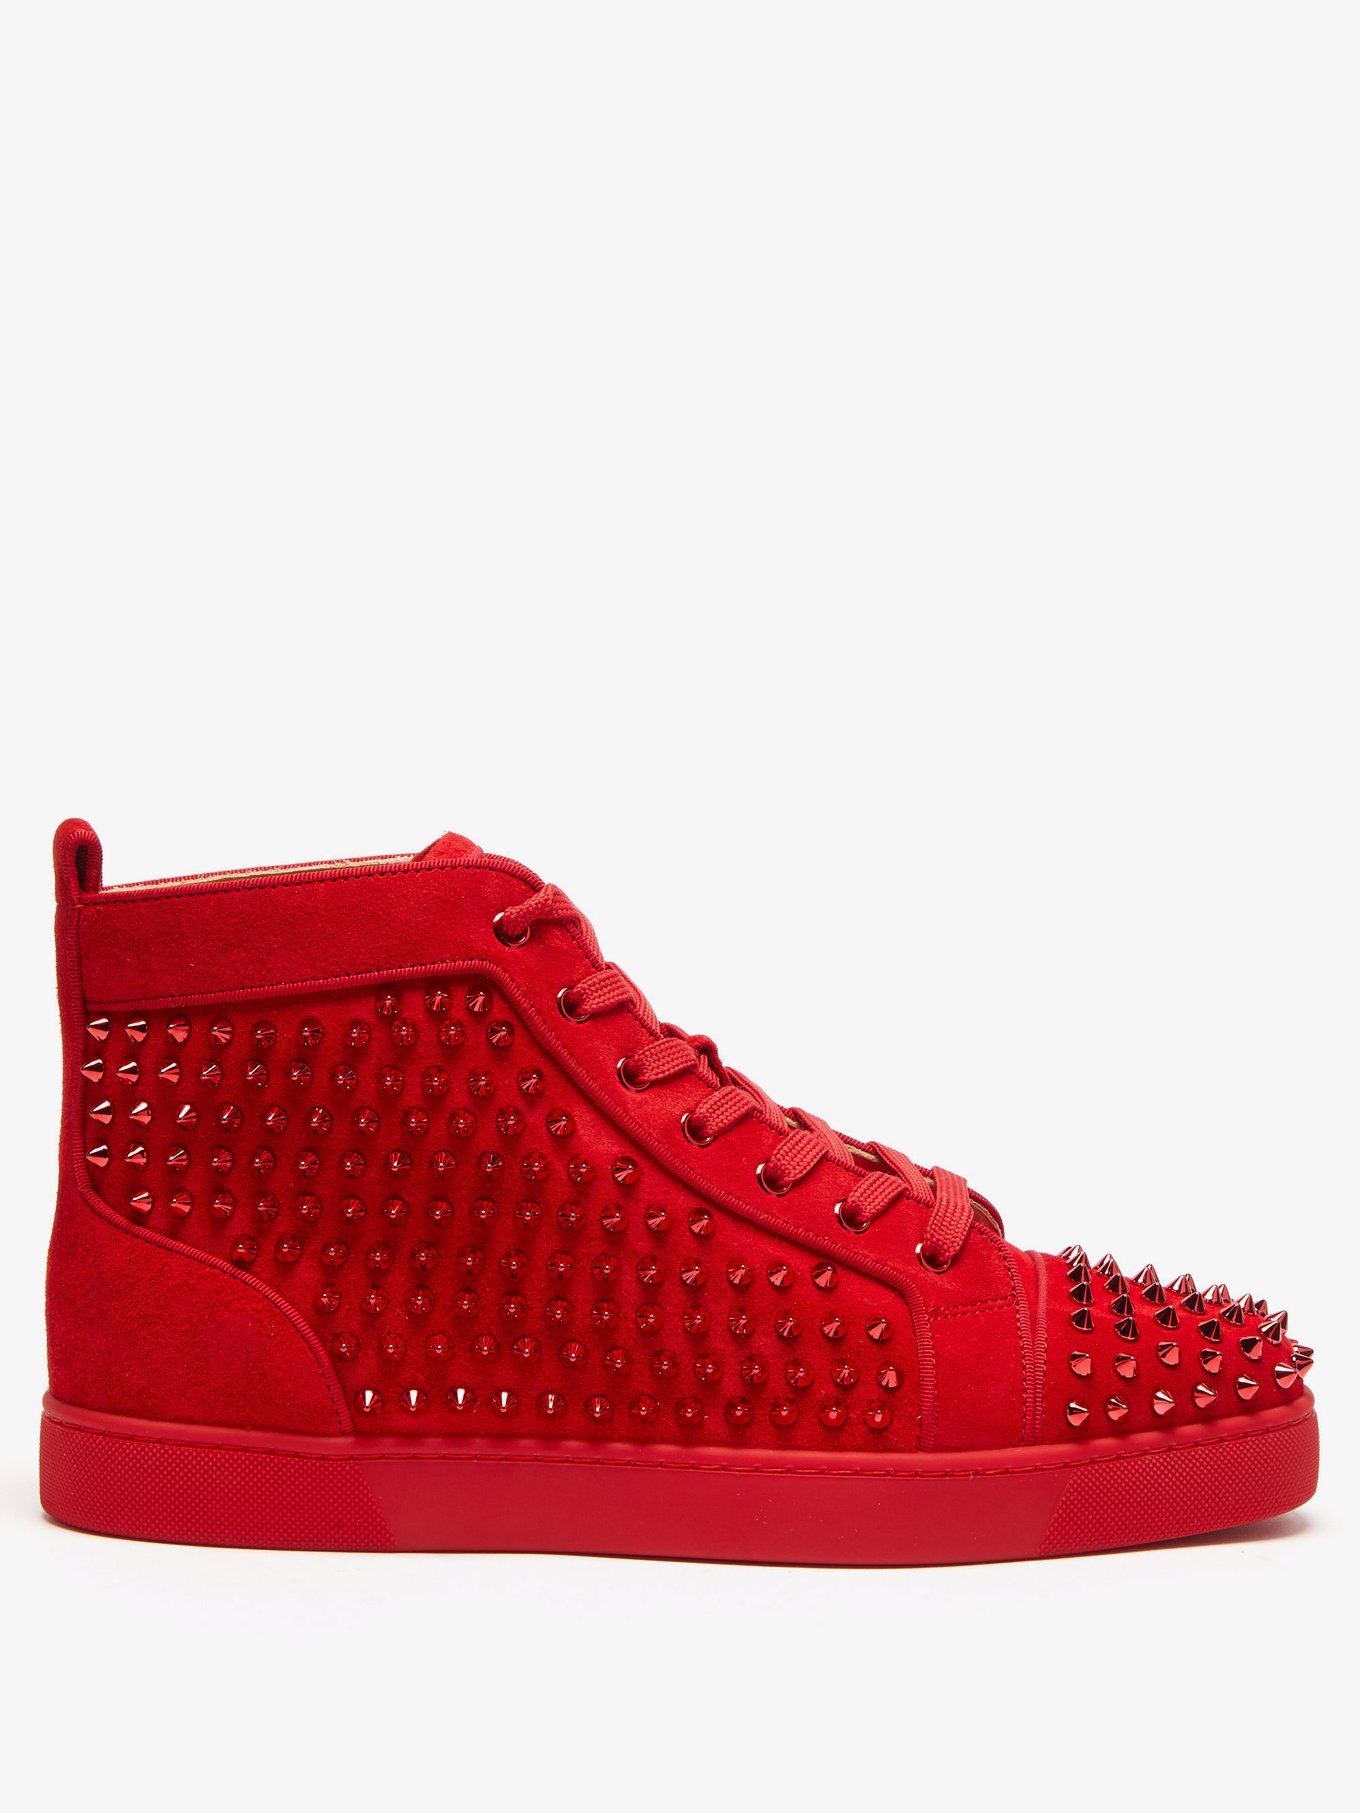 Christian Louboutin, Shoes, Authentic Christian Louboutin Peach Nubuck  Spike Louis Orlato Mid Top Sneakers